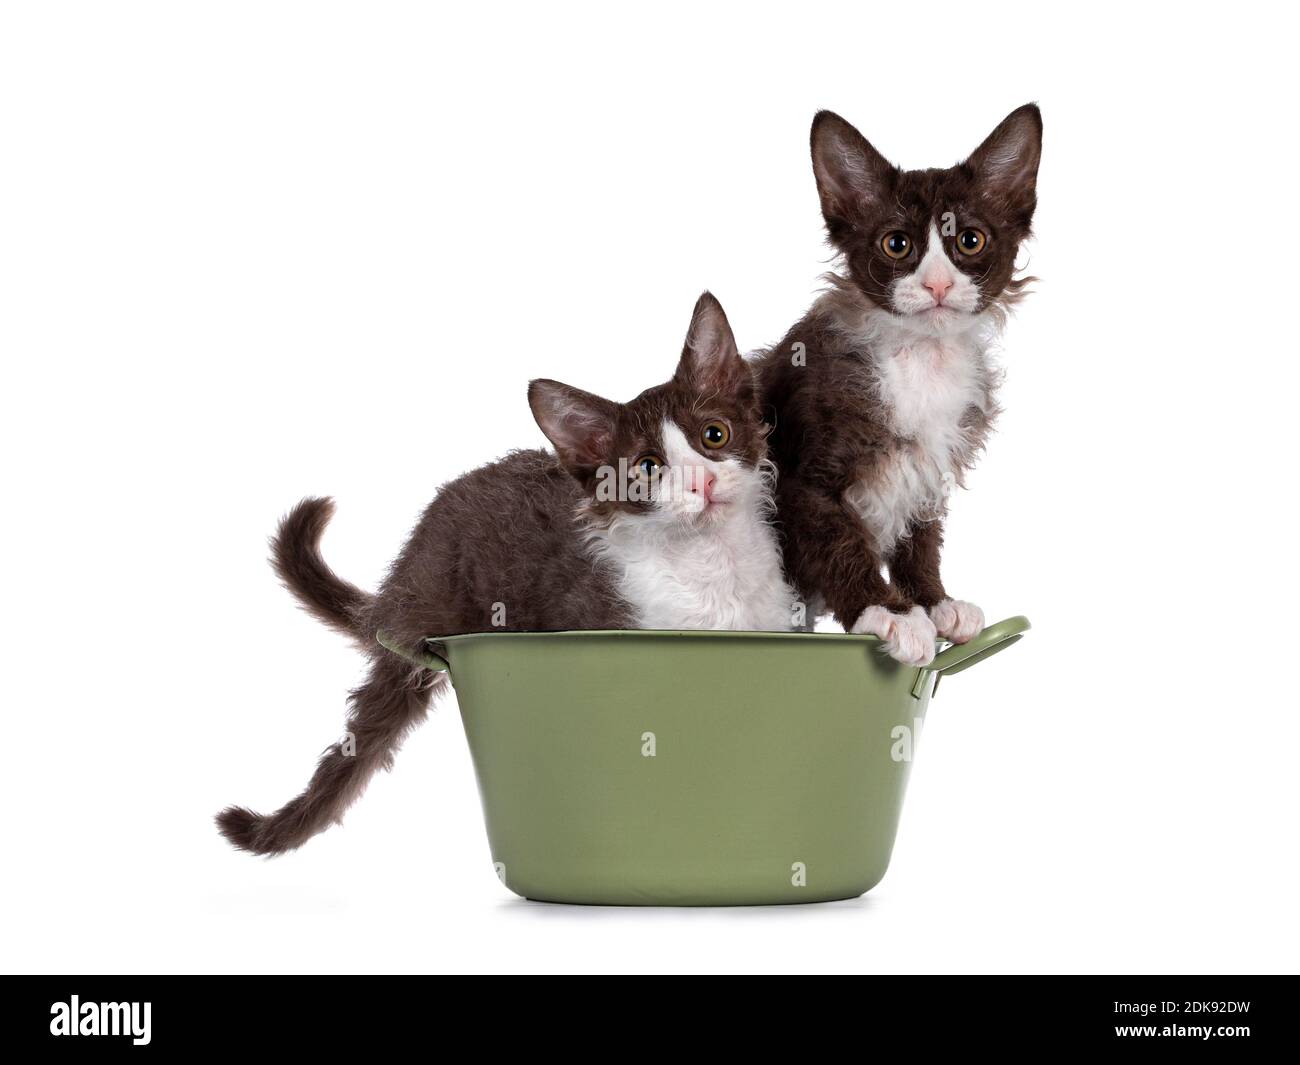 Adorable duo of Bown with white LaPerm cat kittens, sitting together in a green washing tub. Looking both towards camera with curious orange eyes. iso Stock Photo